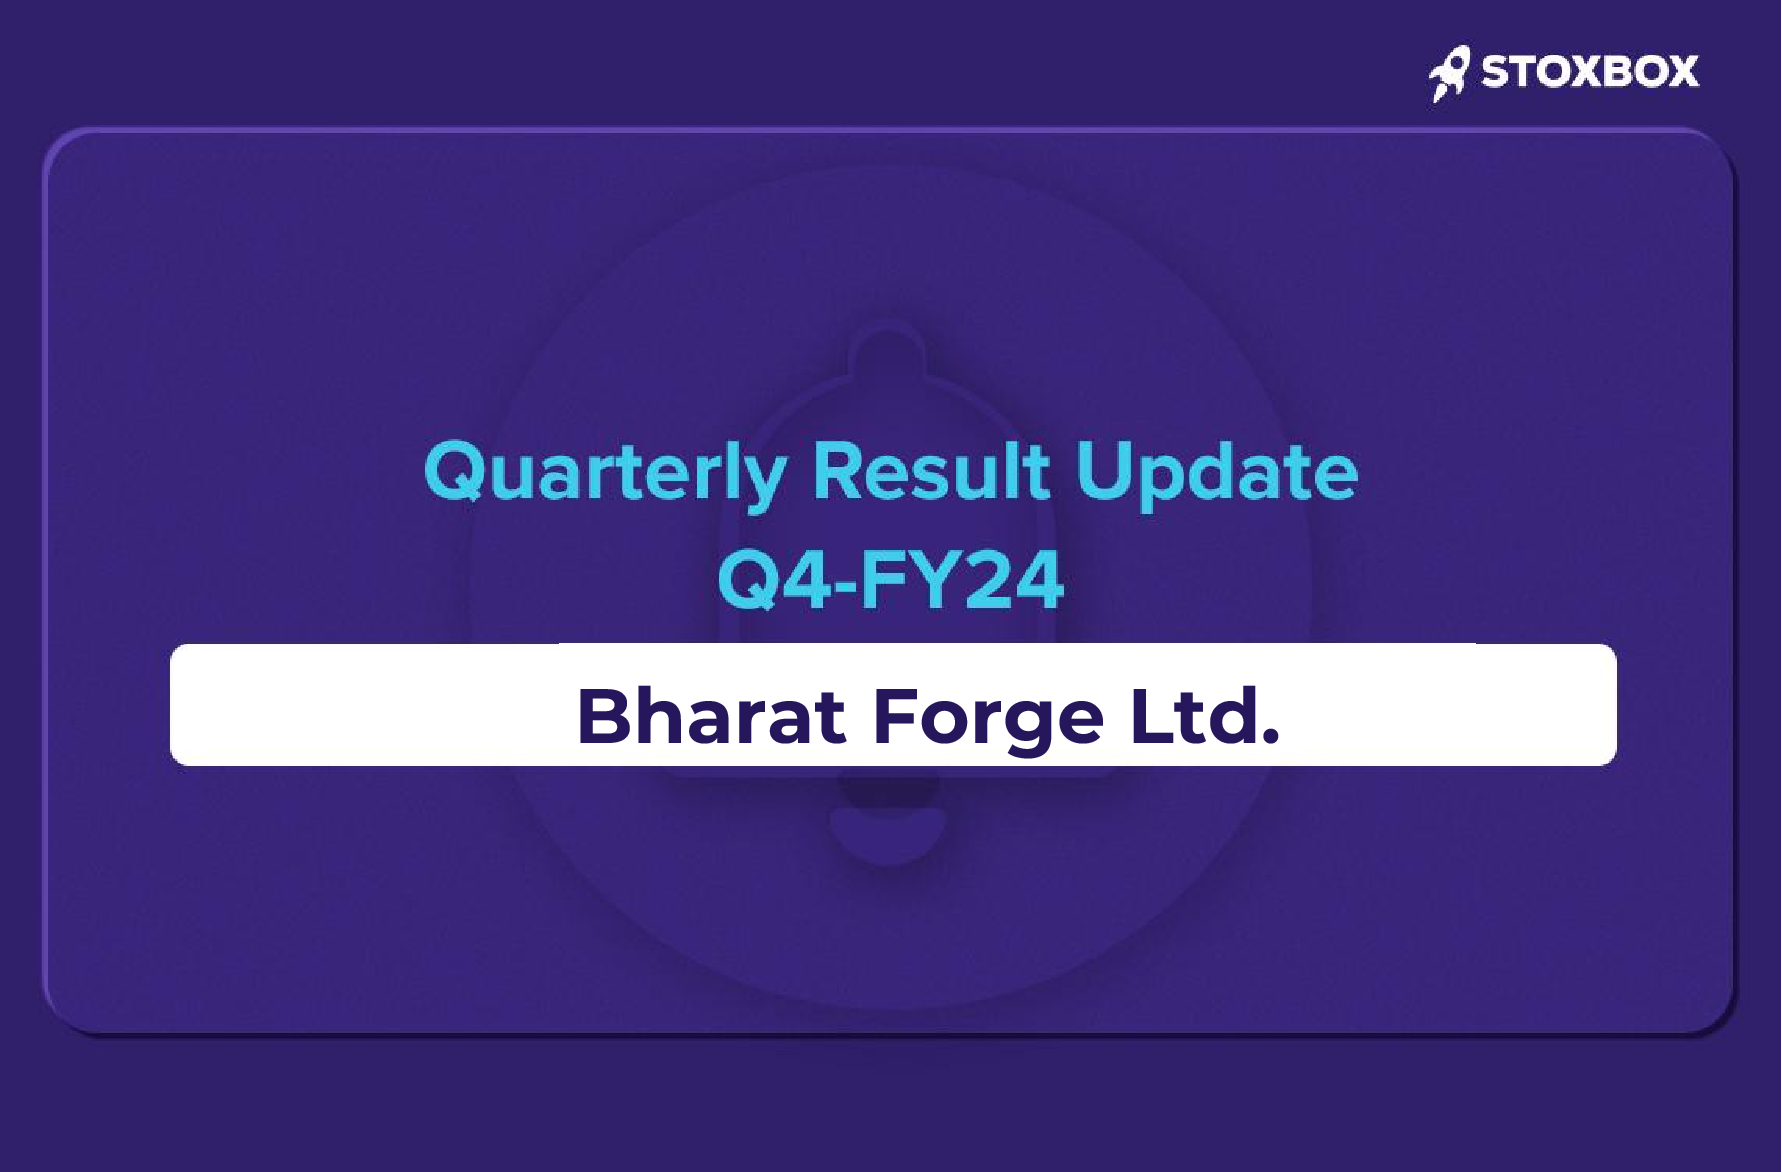 Bharat forge Quarterly results